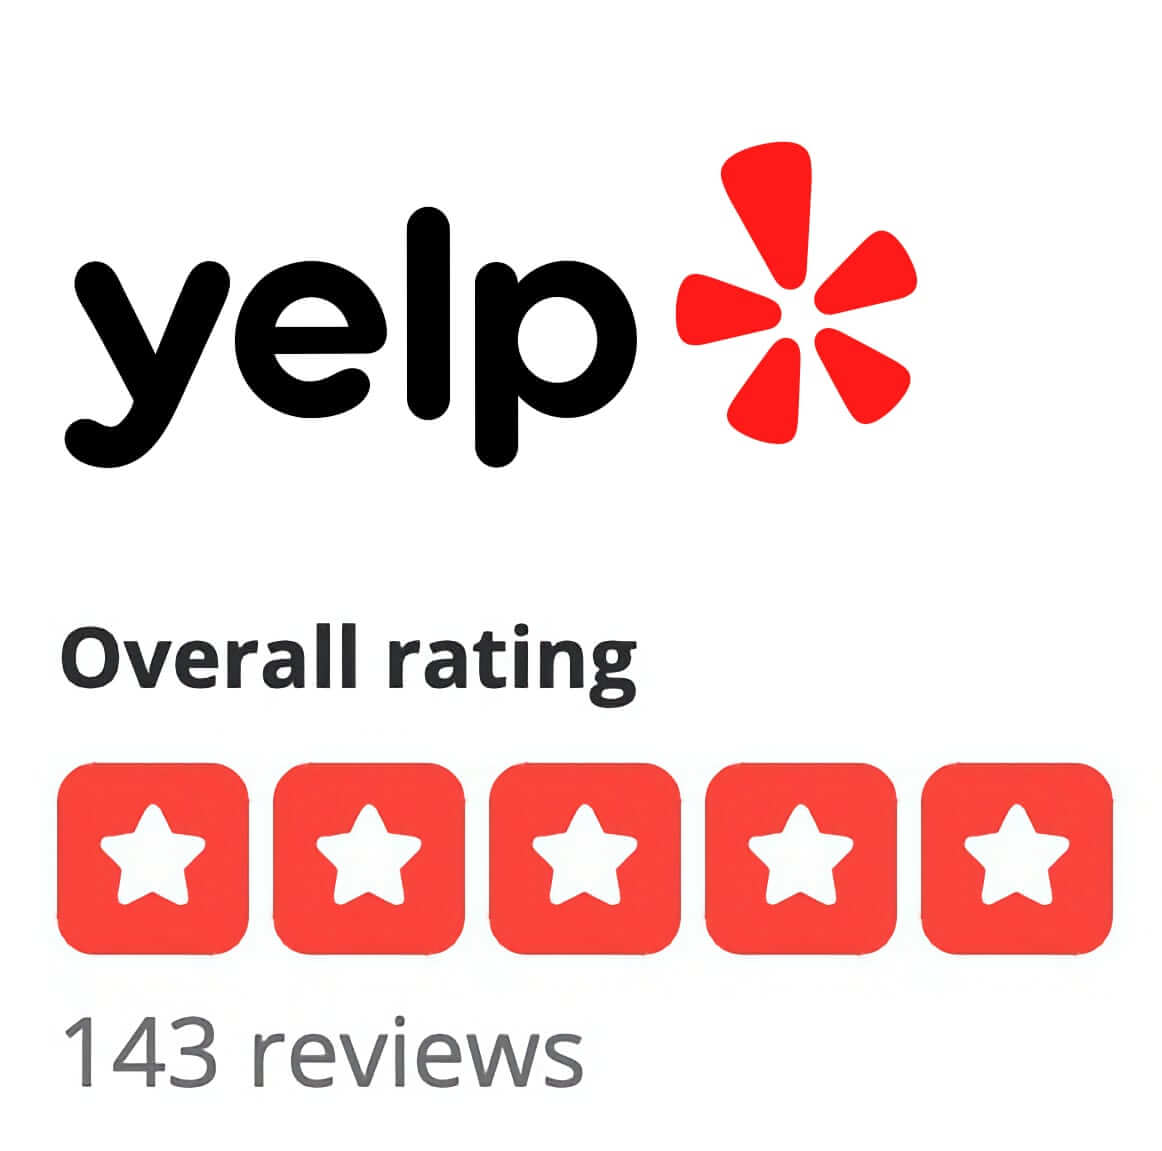 A Yelp review ranking with 143 reviews resulting in a 5-star overall rating.